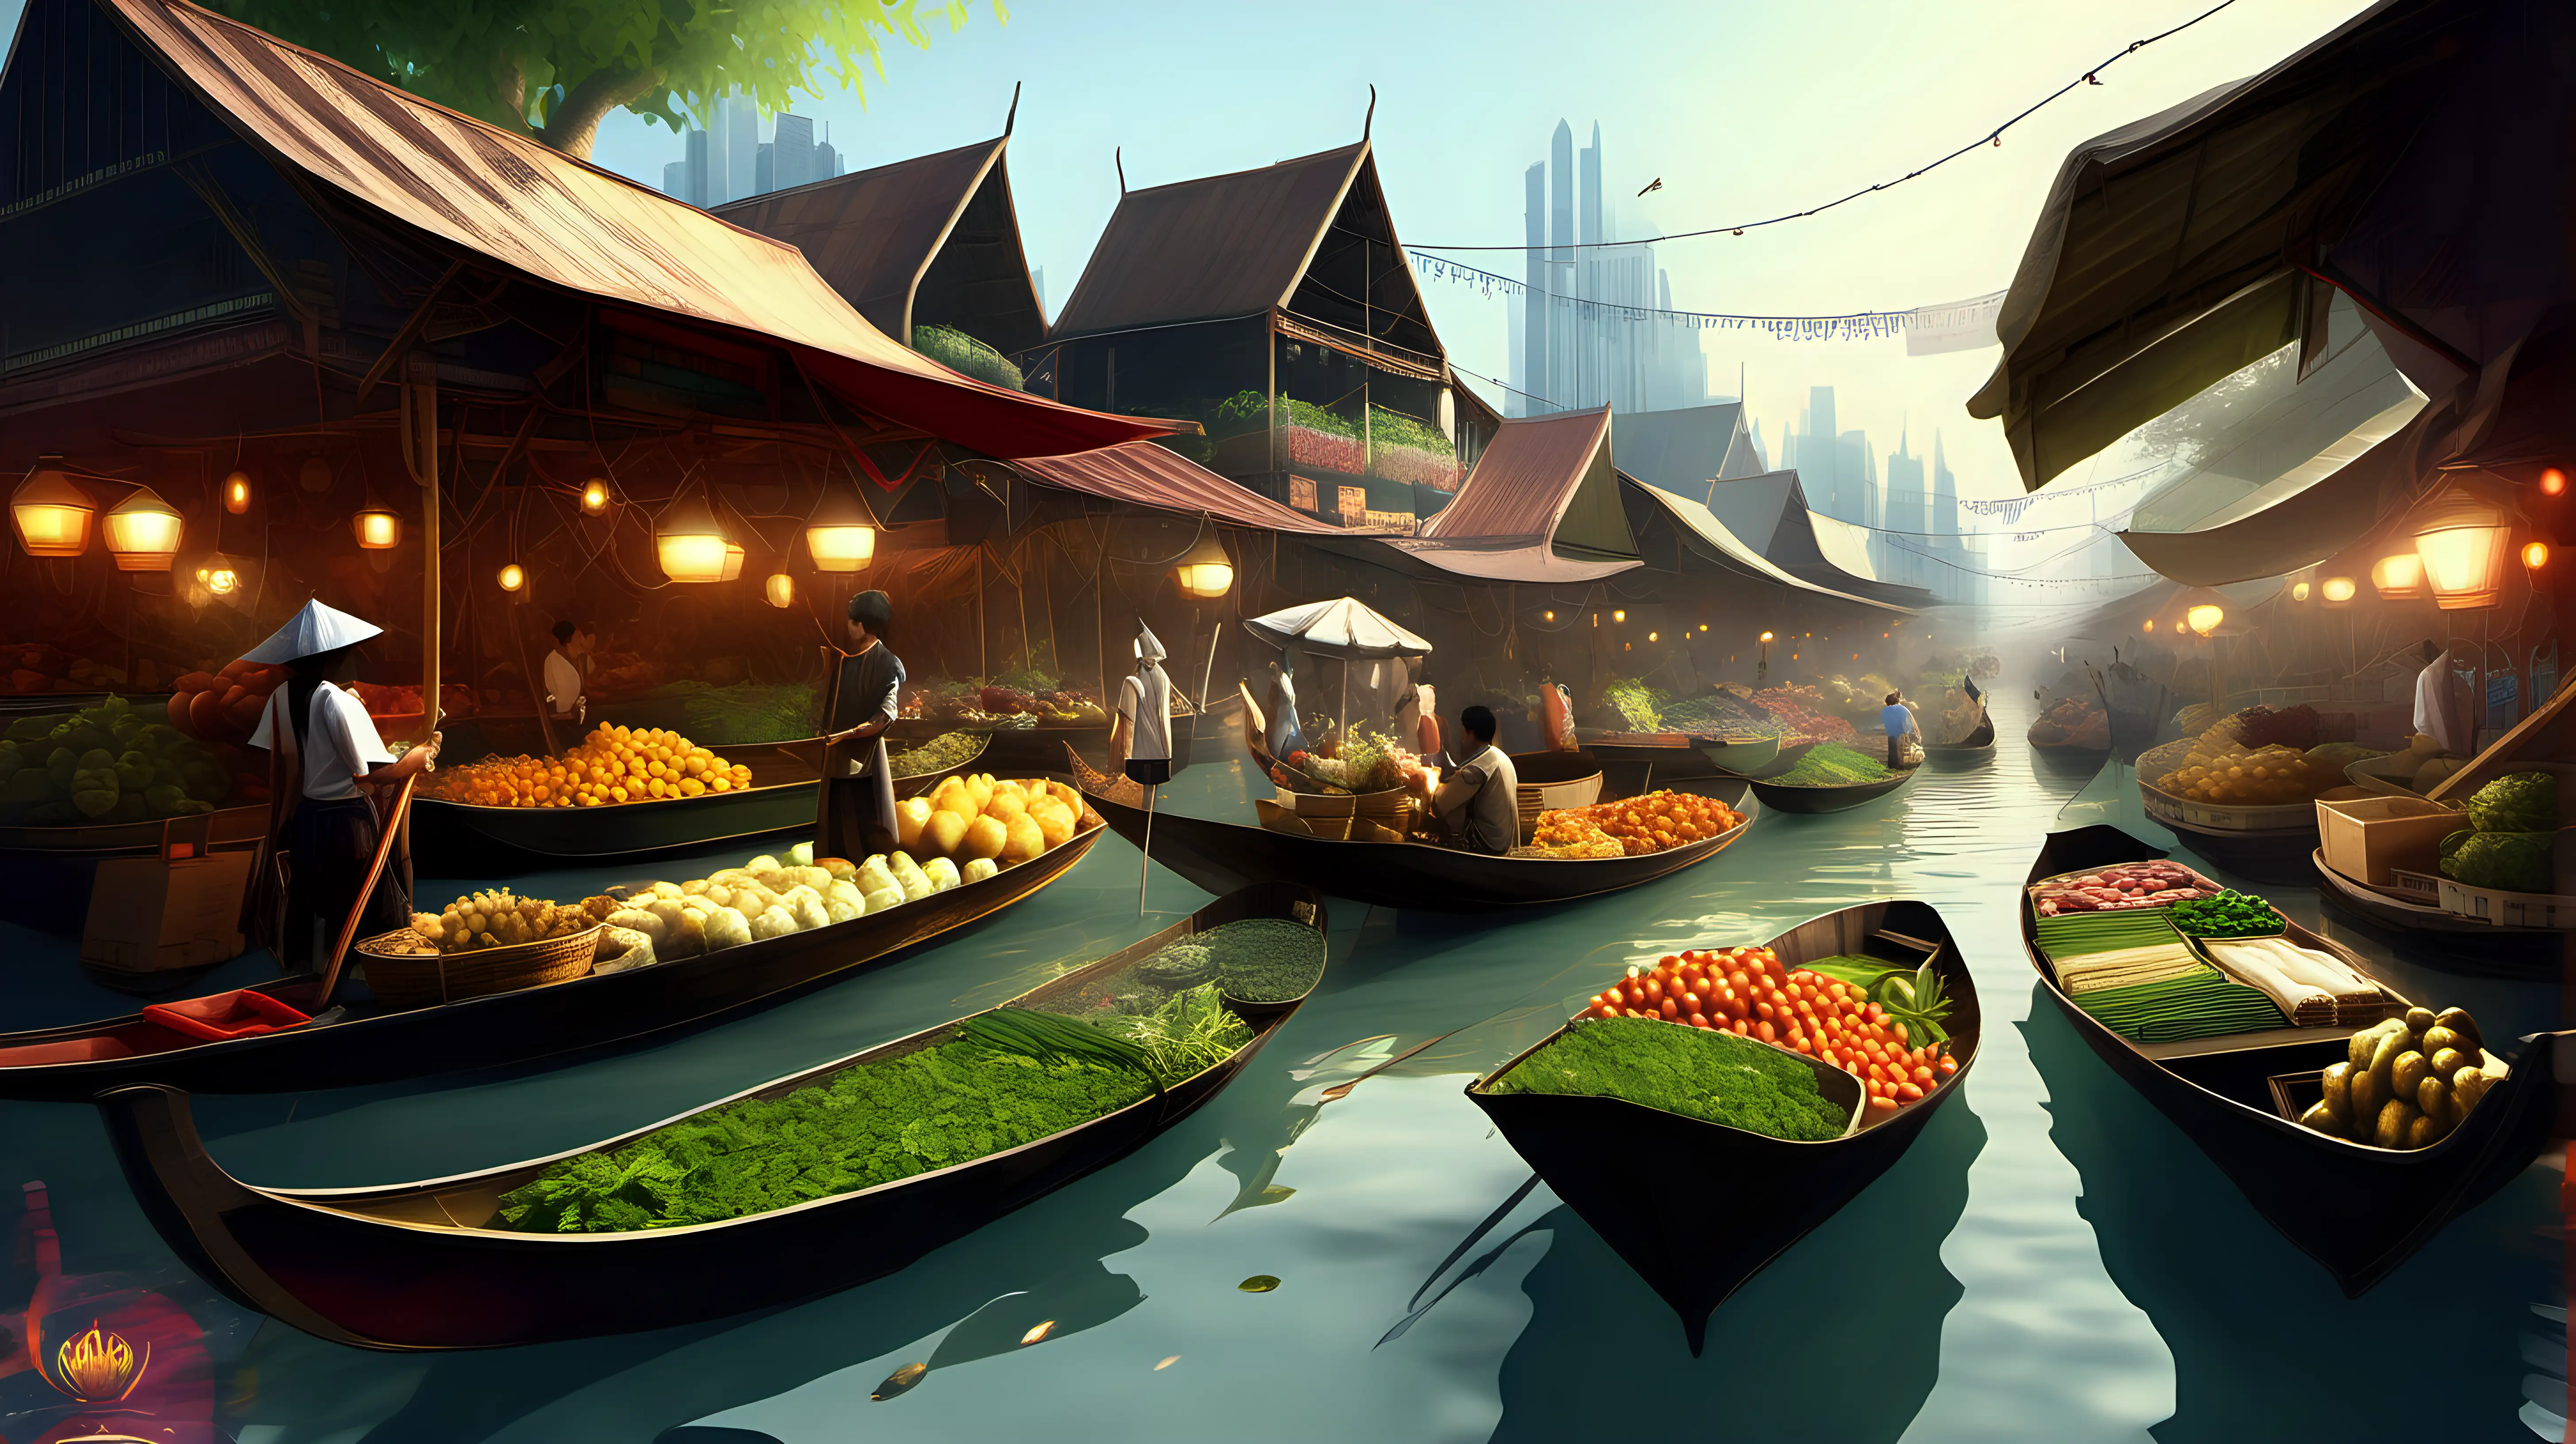 Enchanting Fantasy Floating Market with Colorful Stalls and Mystical Creatures